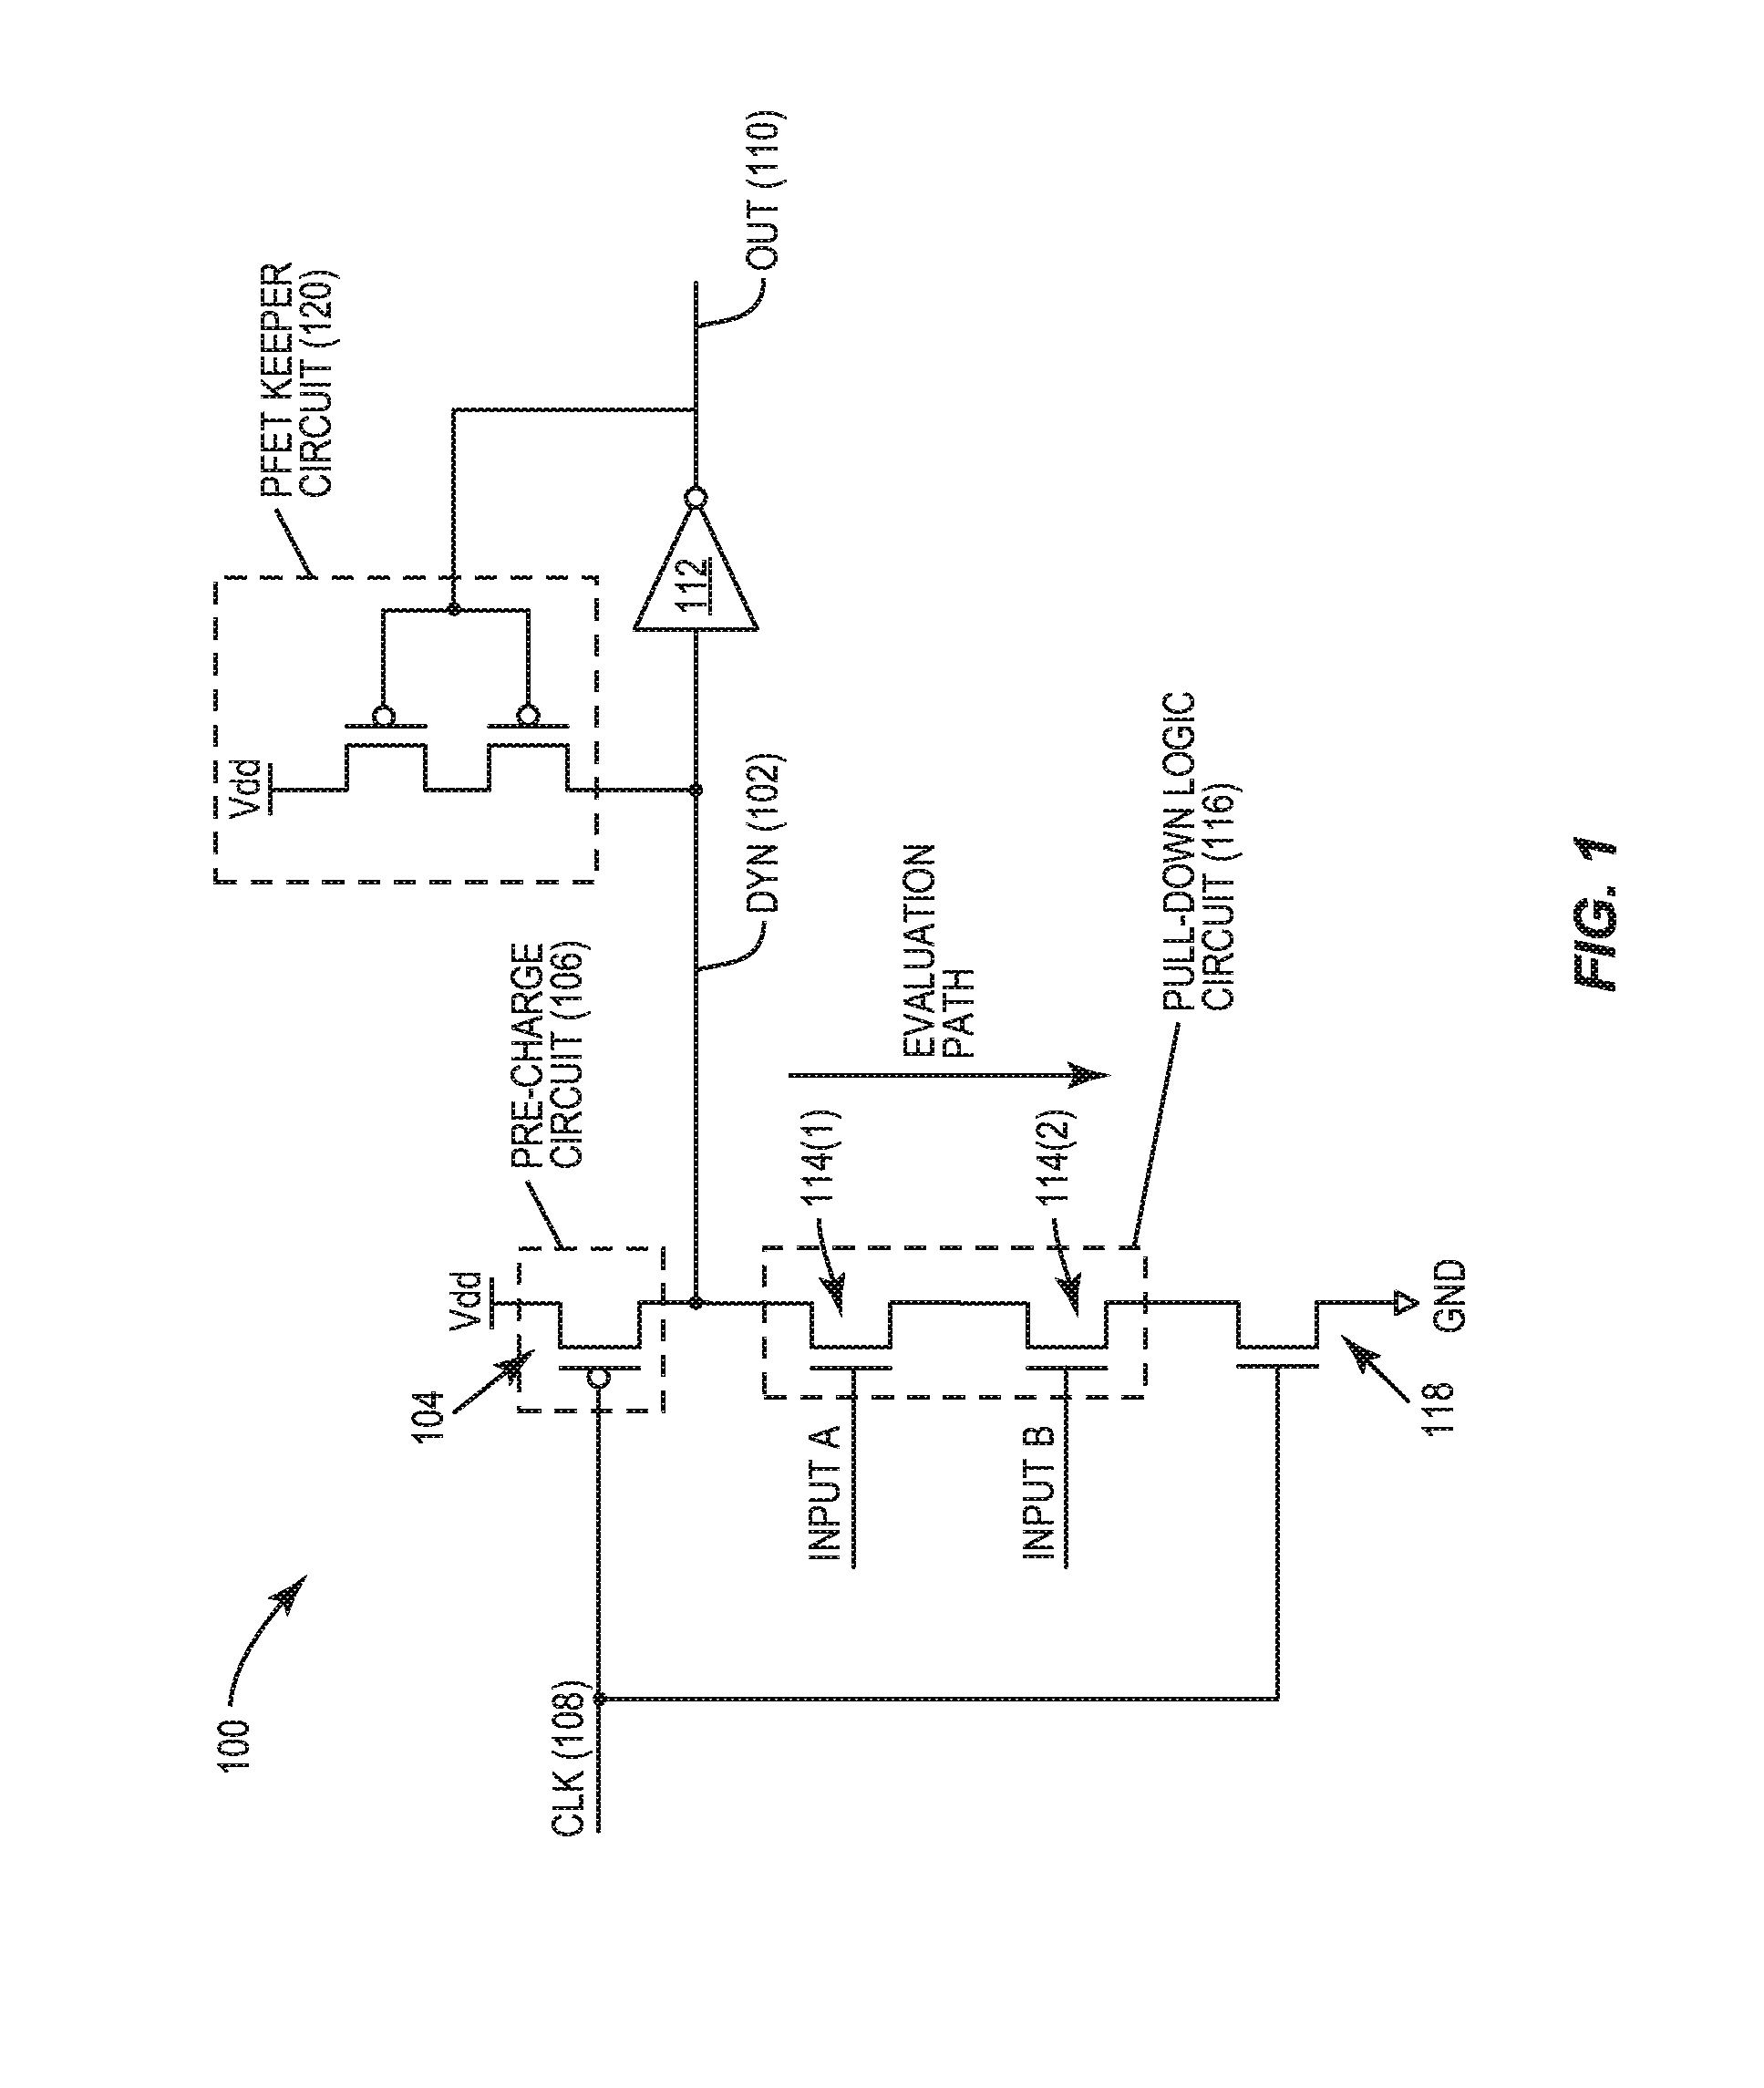 Dynamic tag compare circuits employing p-type field-effect transistor (PFET)-dominant evaluation circuits for reduced evaluation time, and related systems and methods